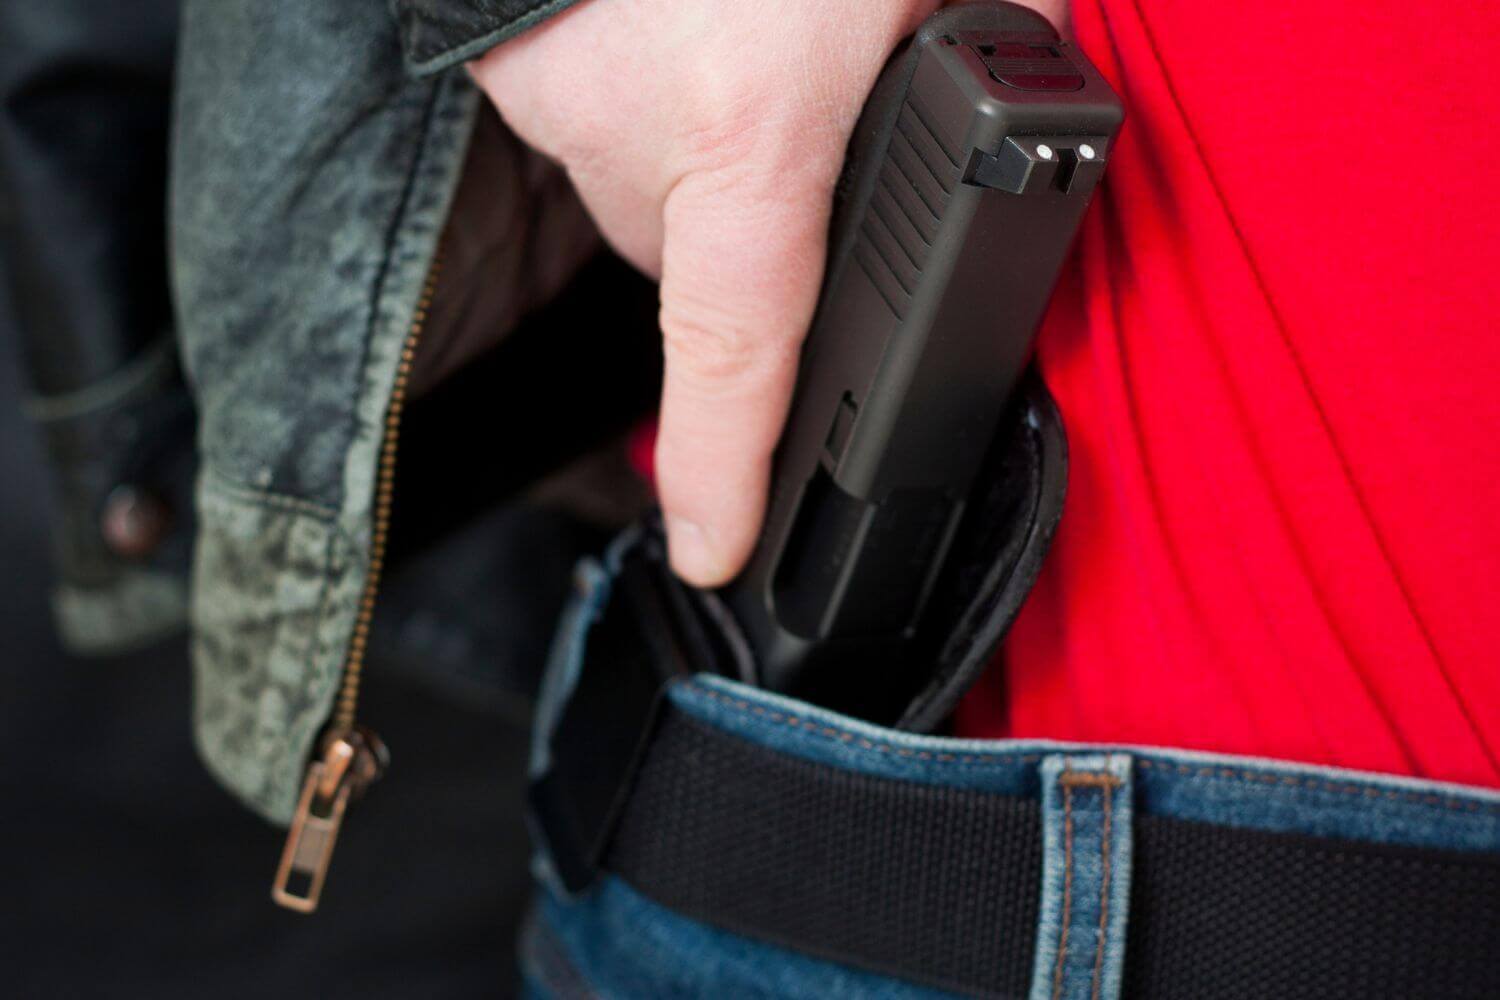 A man drawing his firearm from his concealed carry holster